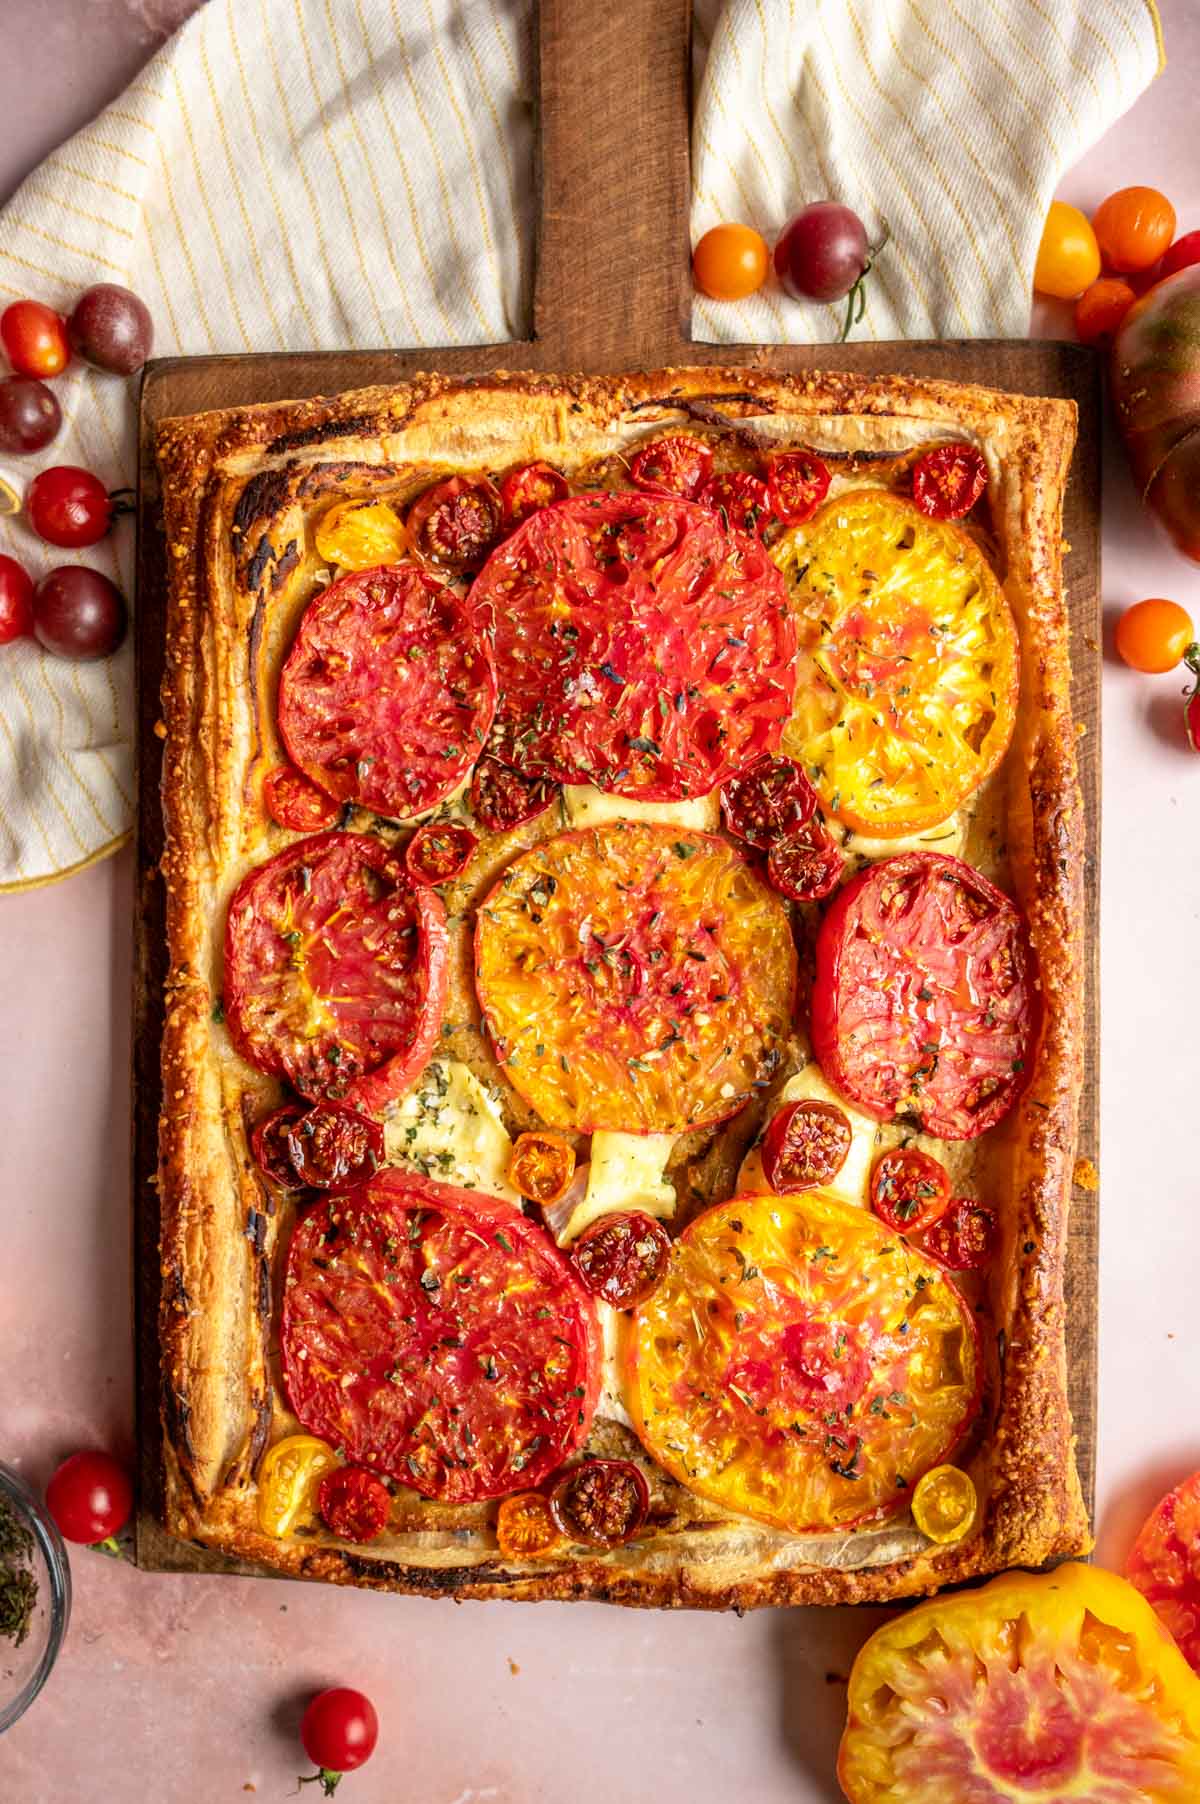 The baked tart on a wood cutting board.